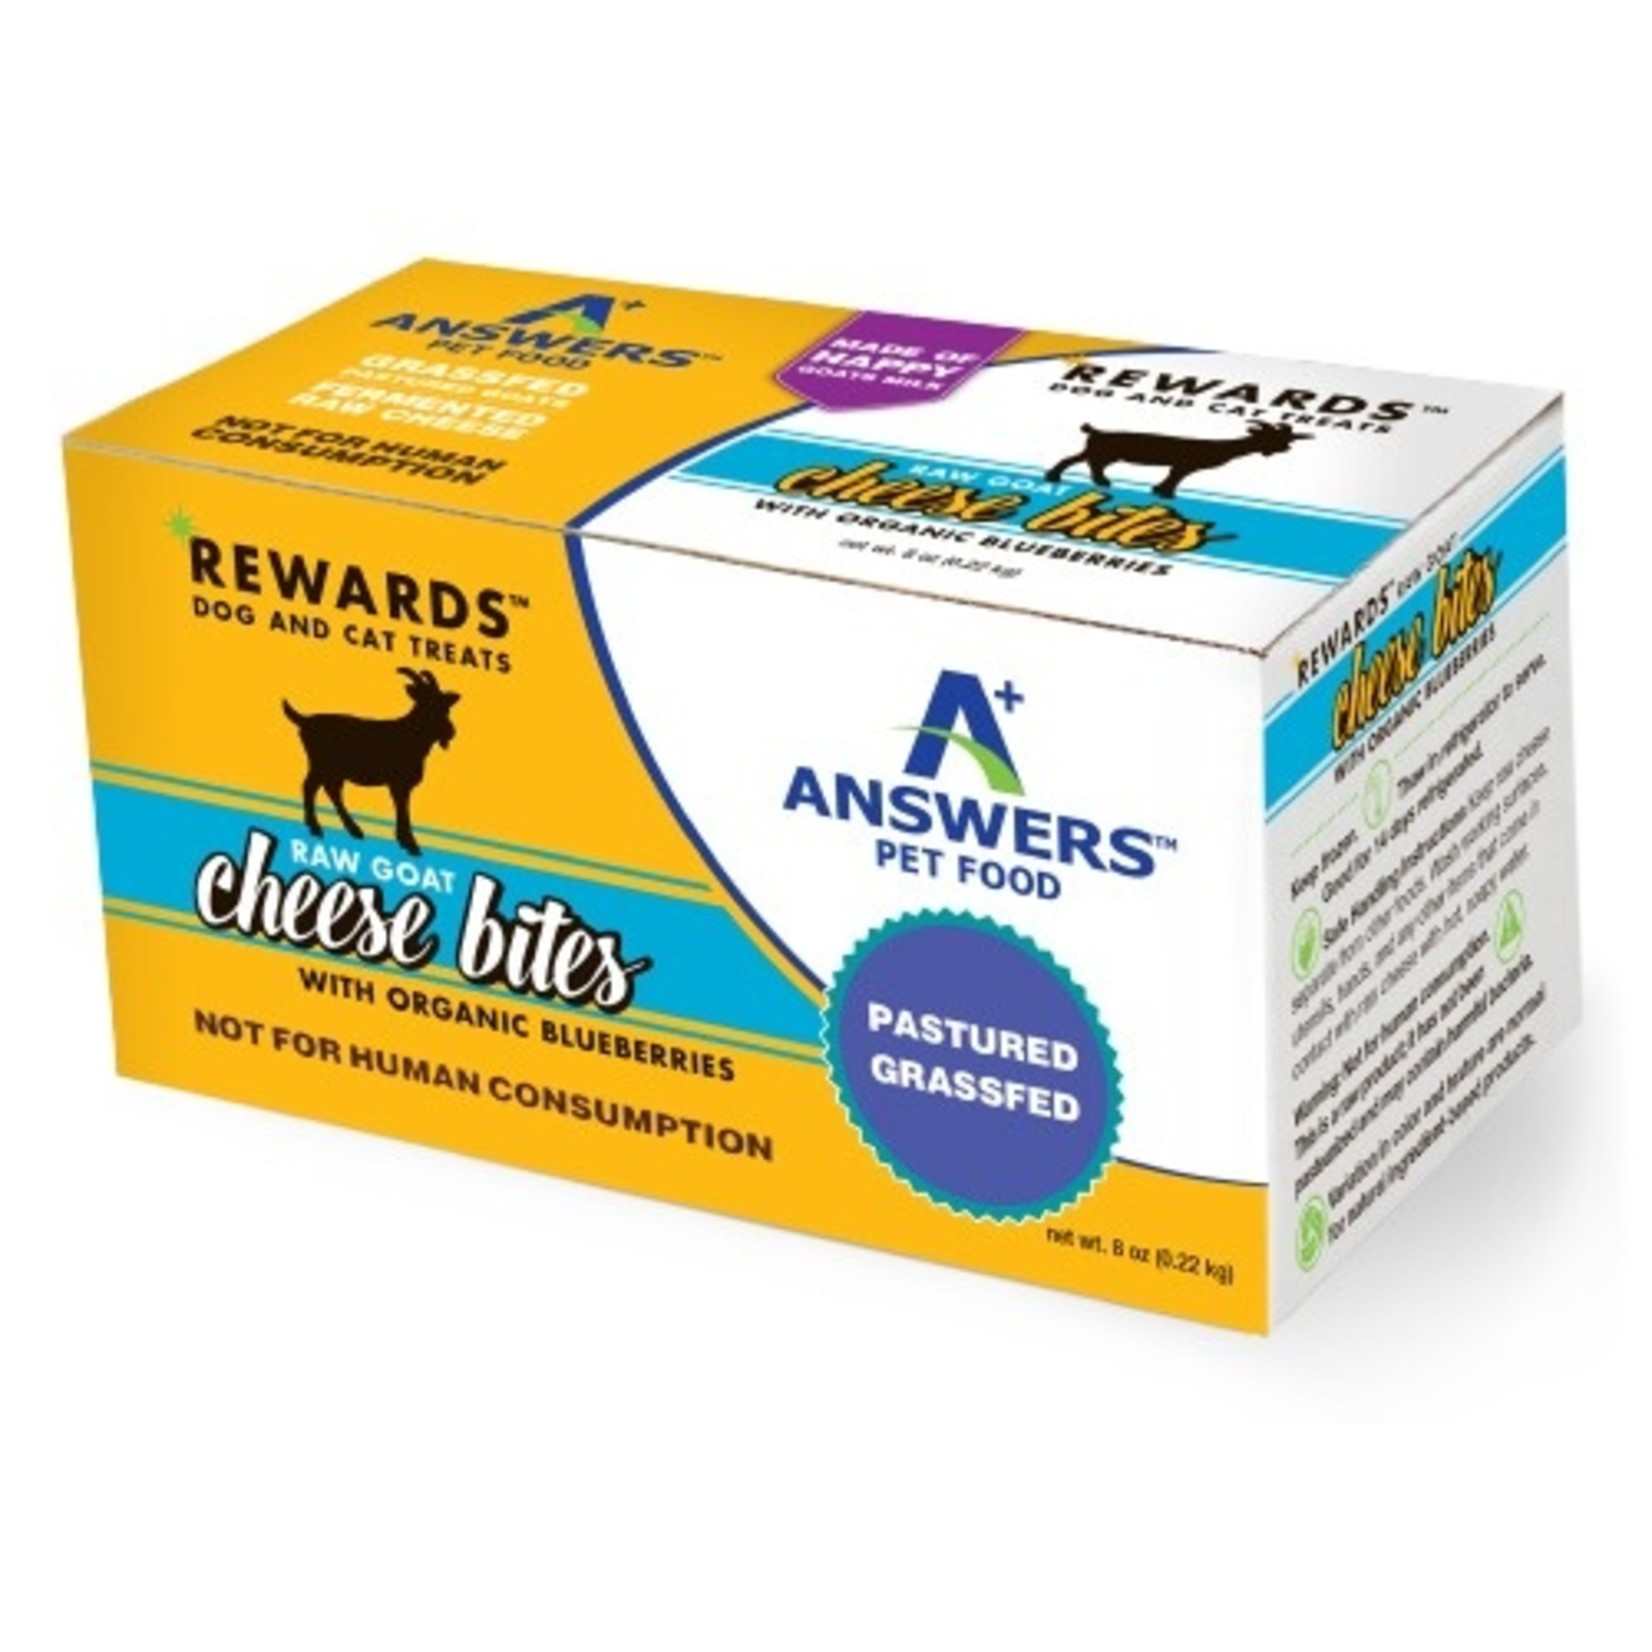 Answers ANSWERS Goat Cheese & Blueberry Treat 8oz